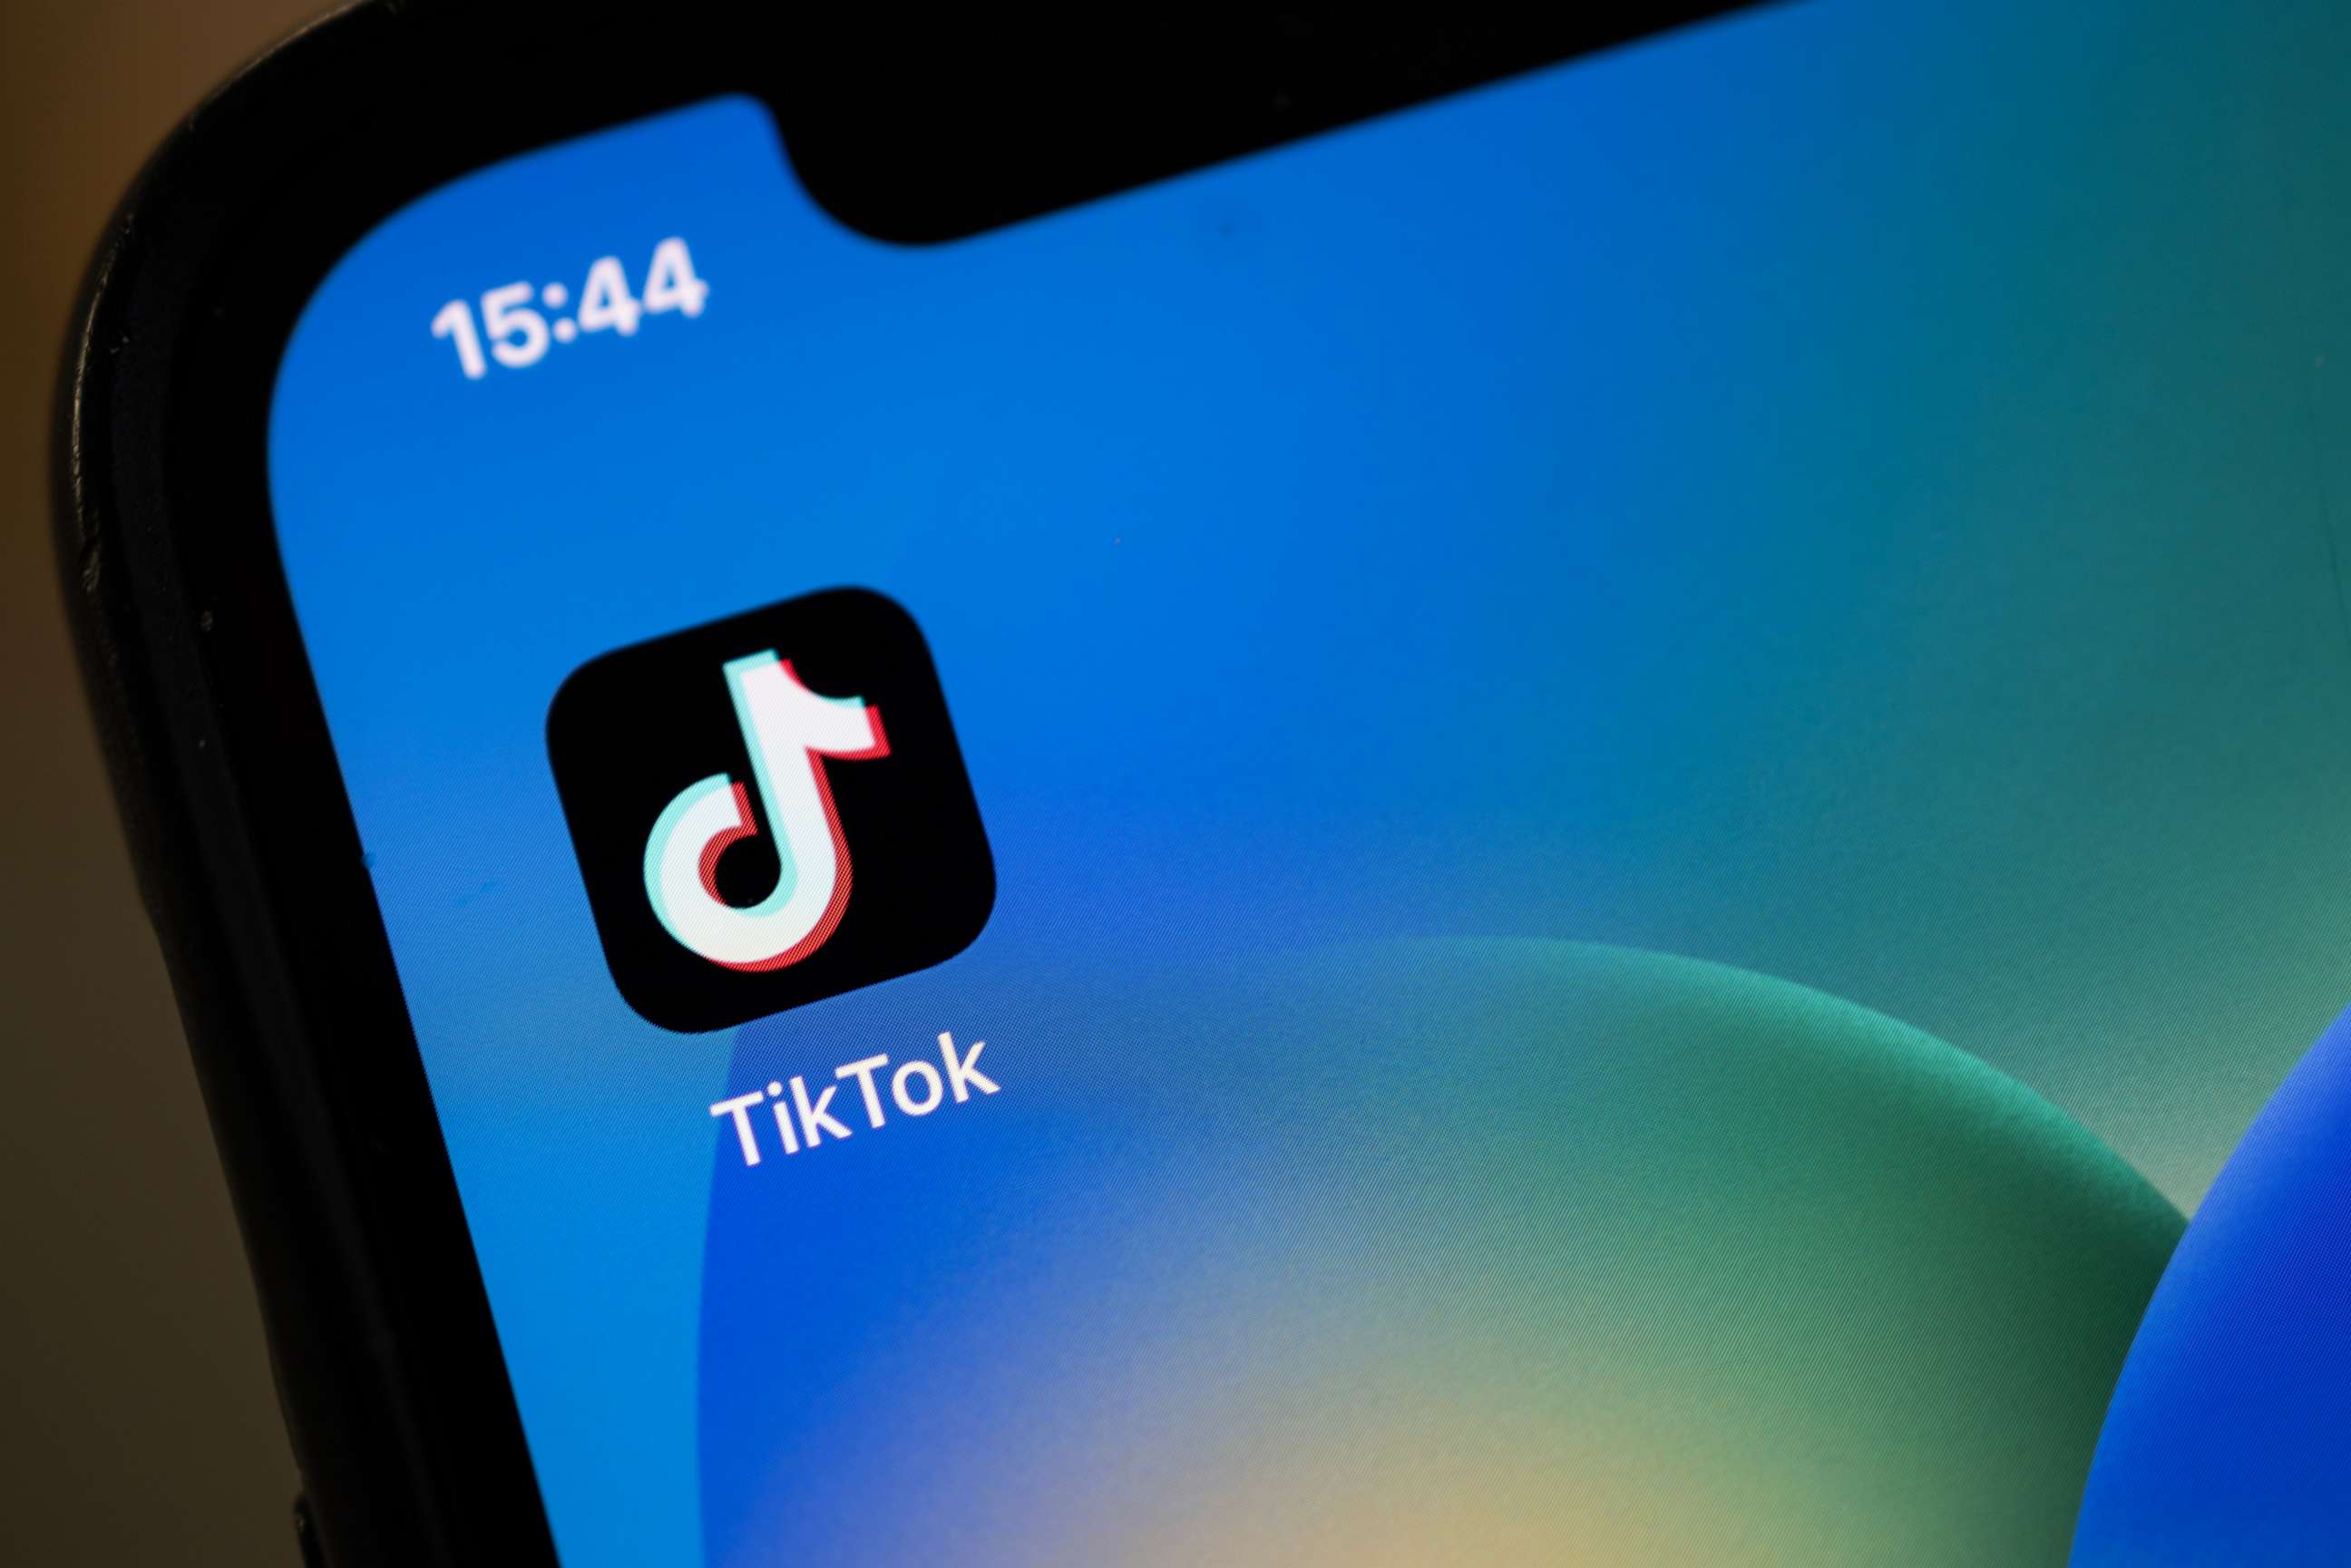 PHOTO: The TikTok app logo is displayed on an iPhone on Feb. 28, 2023 in London.